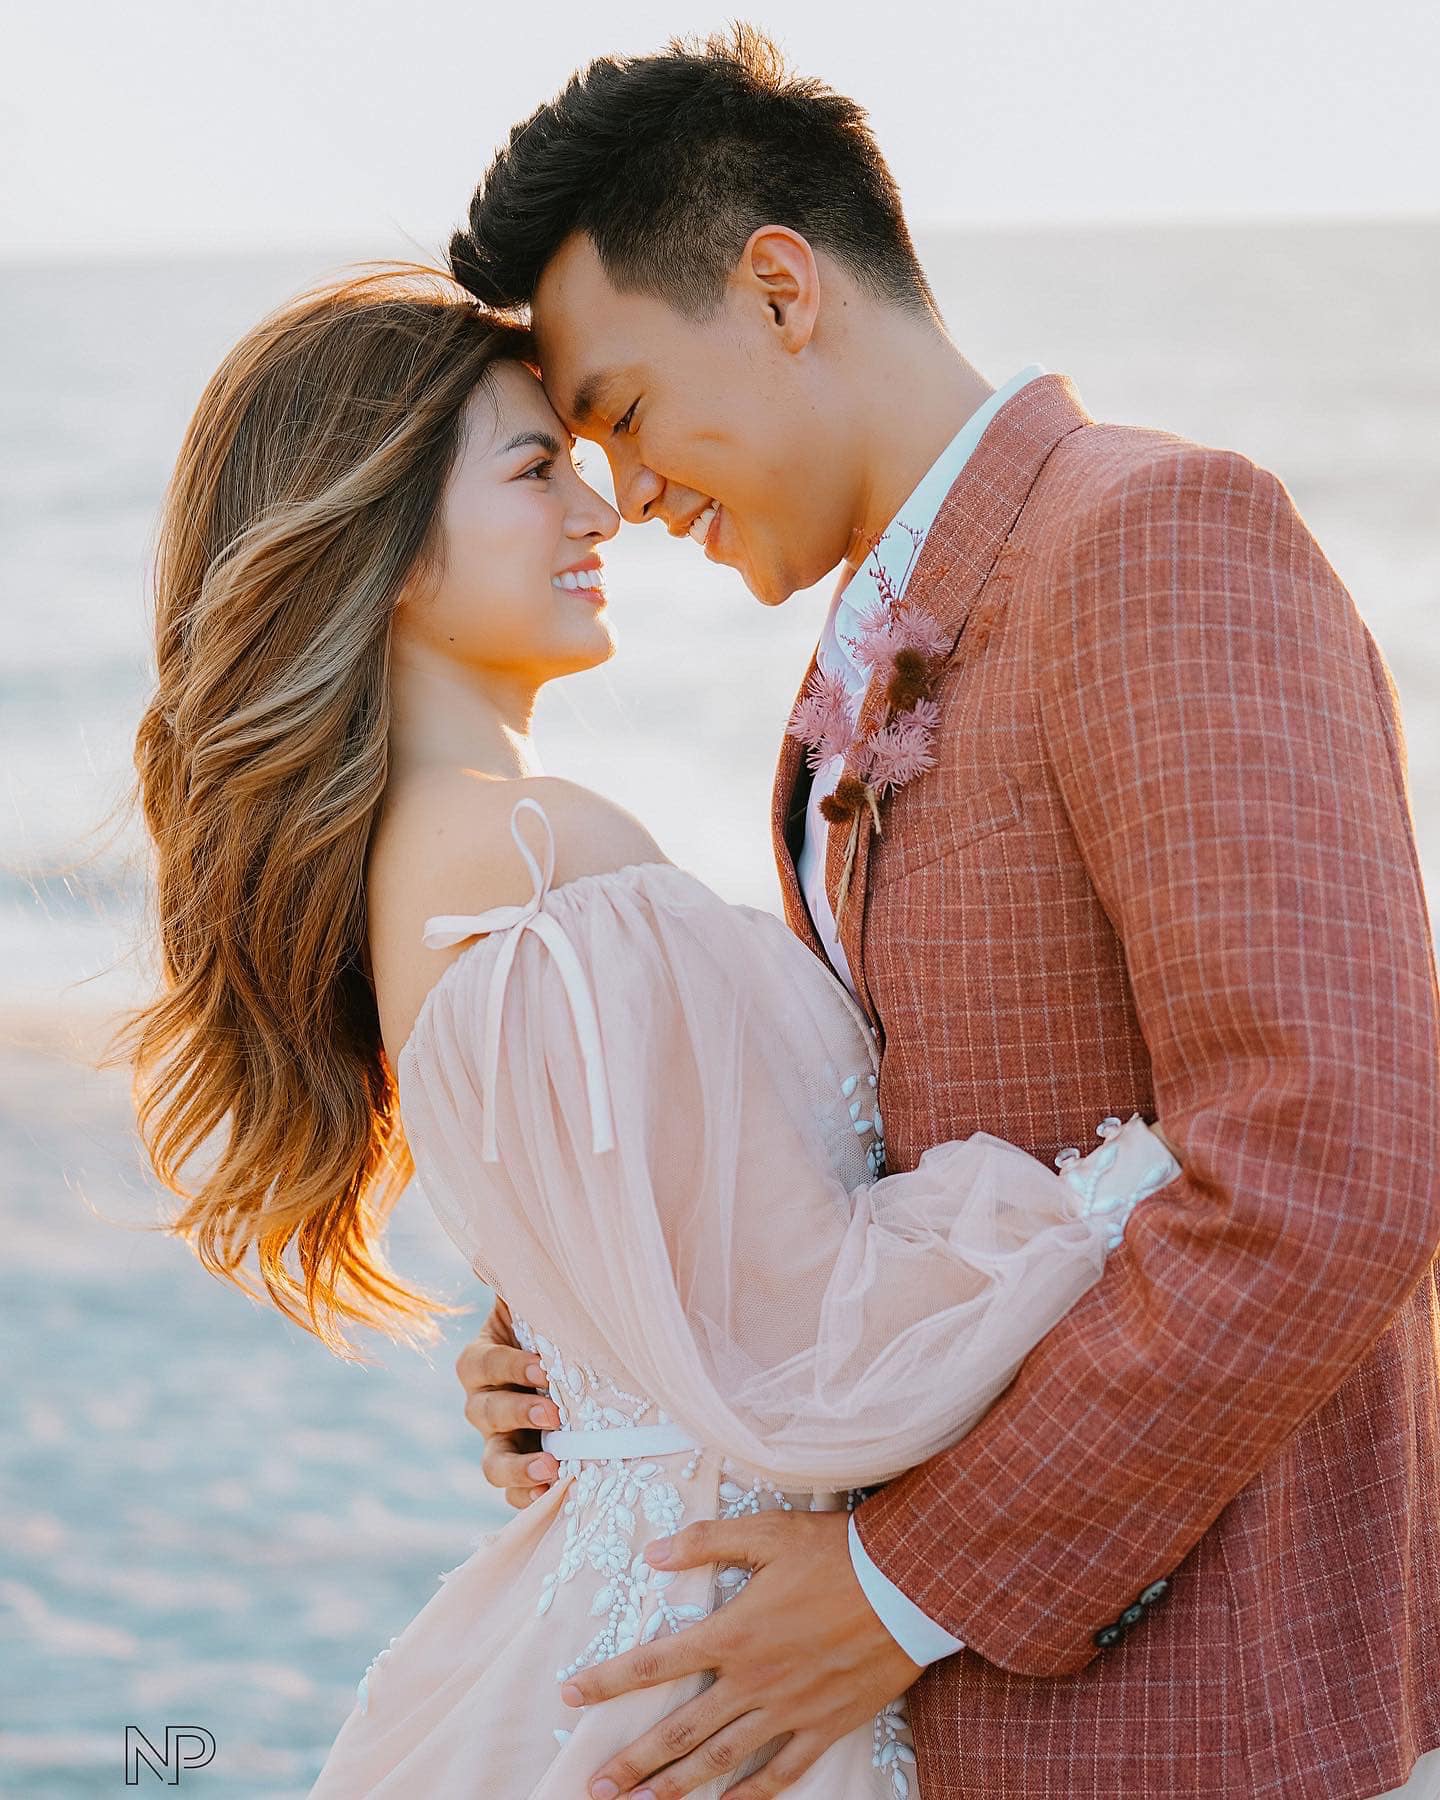 Scottie Thompson and his wife Jinky Serrano in a shoot.